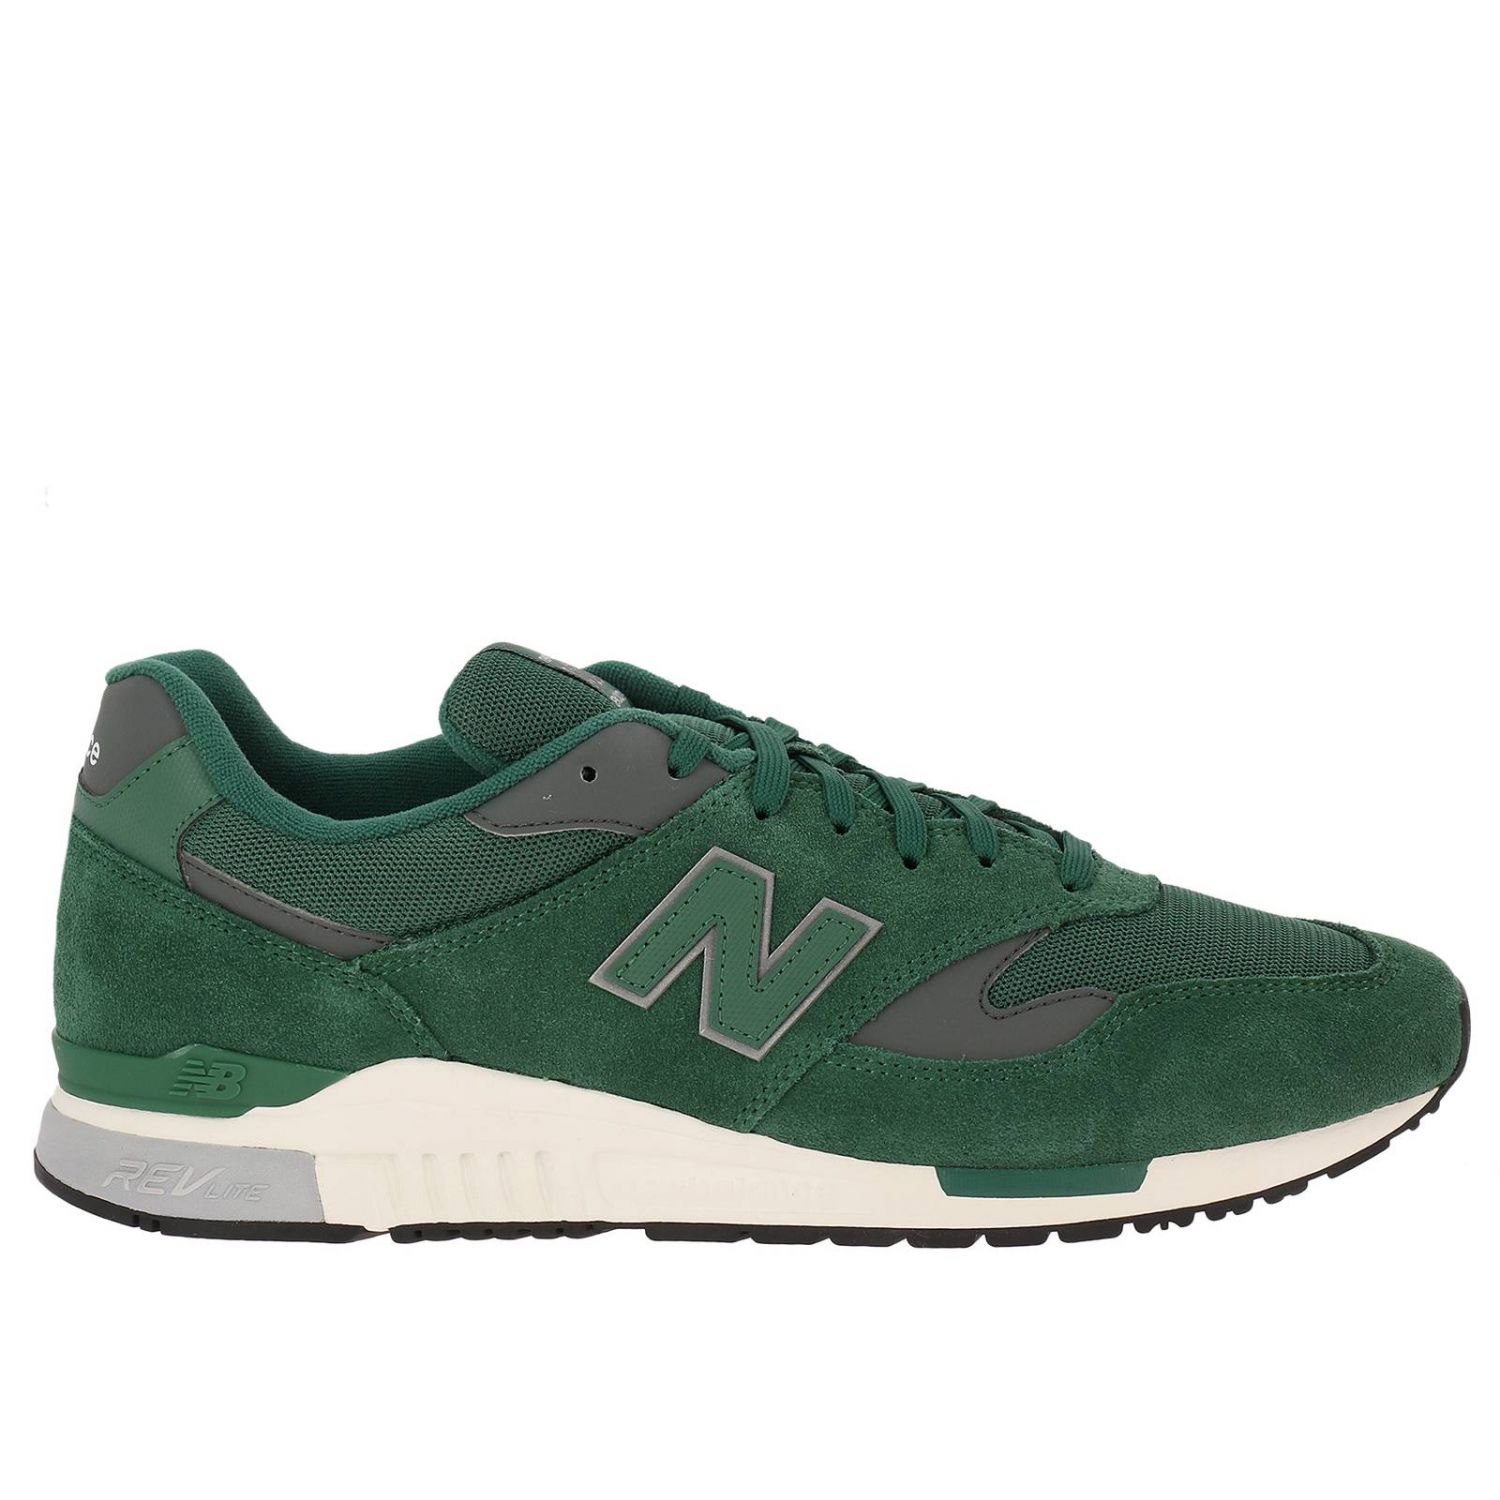 New Balance Outlet: Shoes men | Sneakers New Balance Men Green